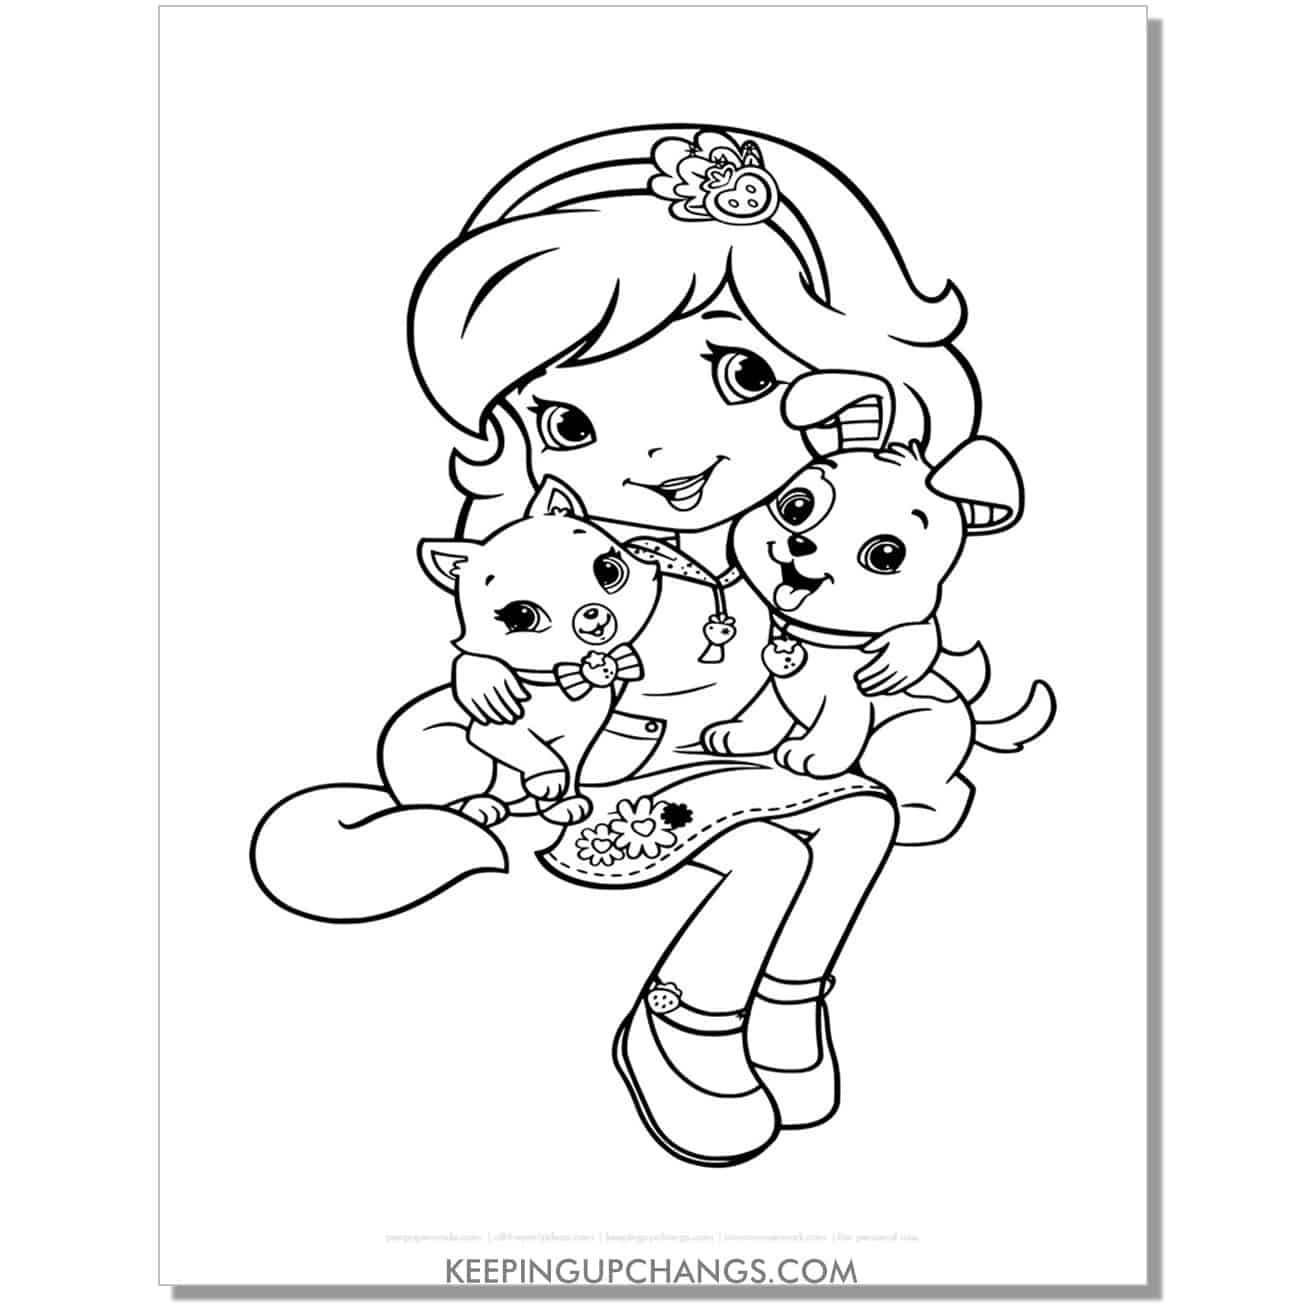 free holding pupcakes and custard strawberry shortcake coloring page, sheet.